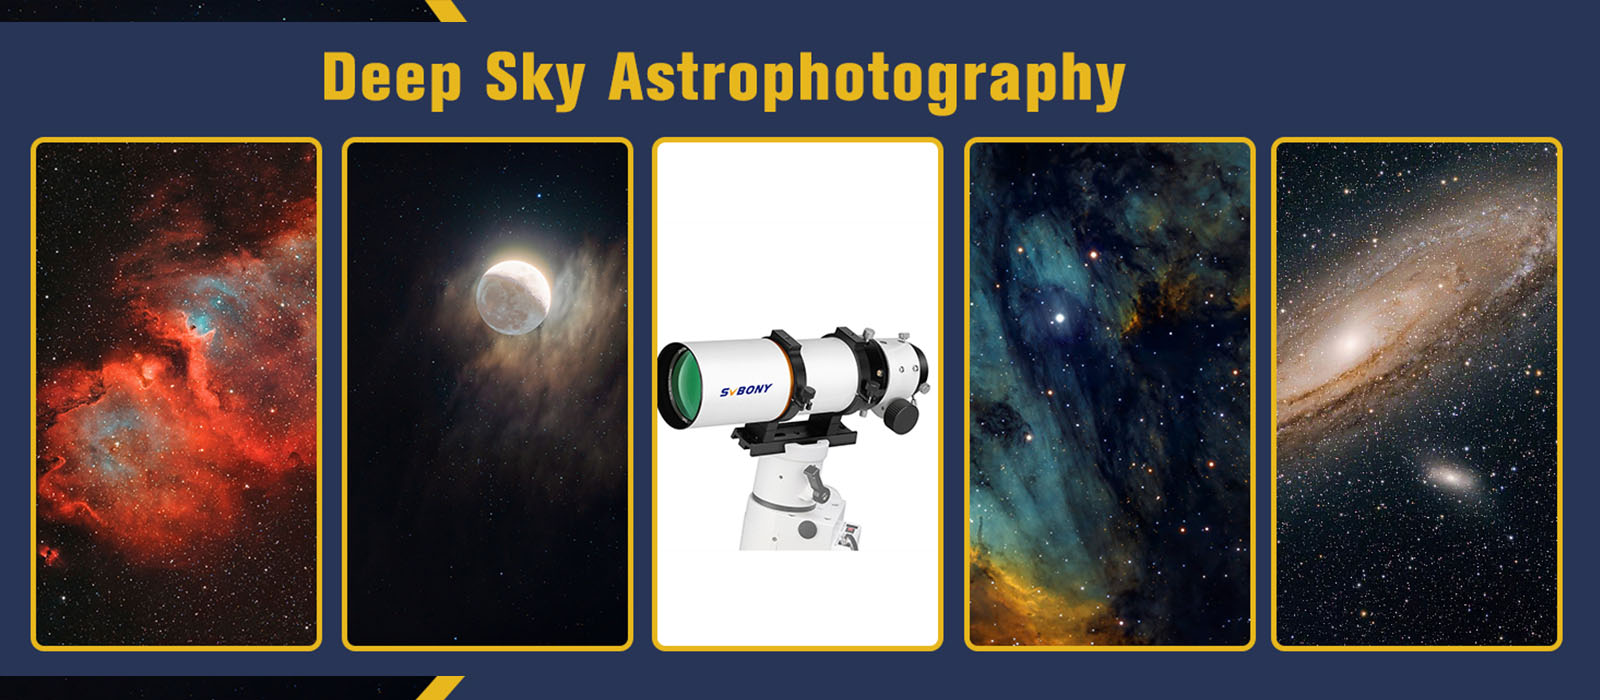 sv503 70 for deep space photography.jpg